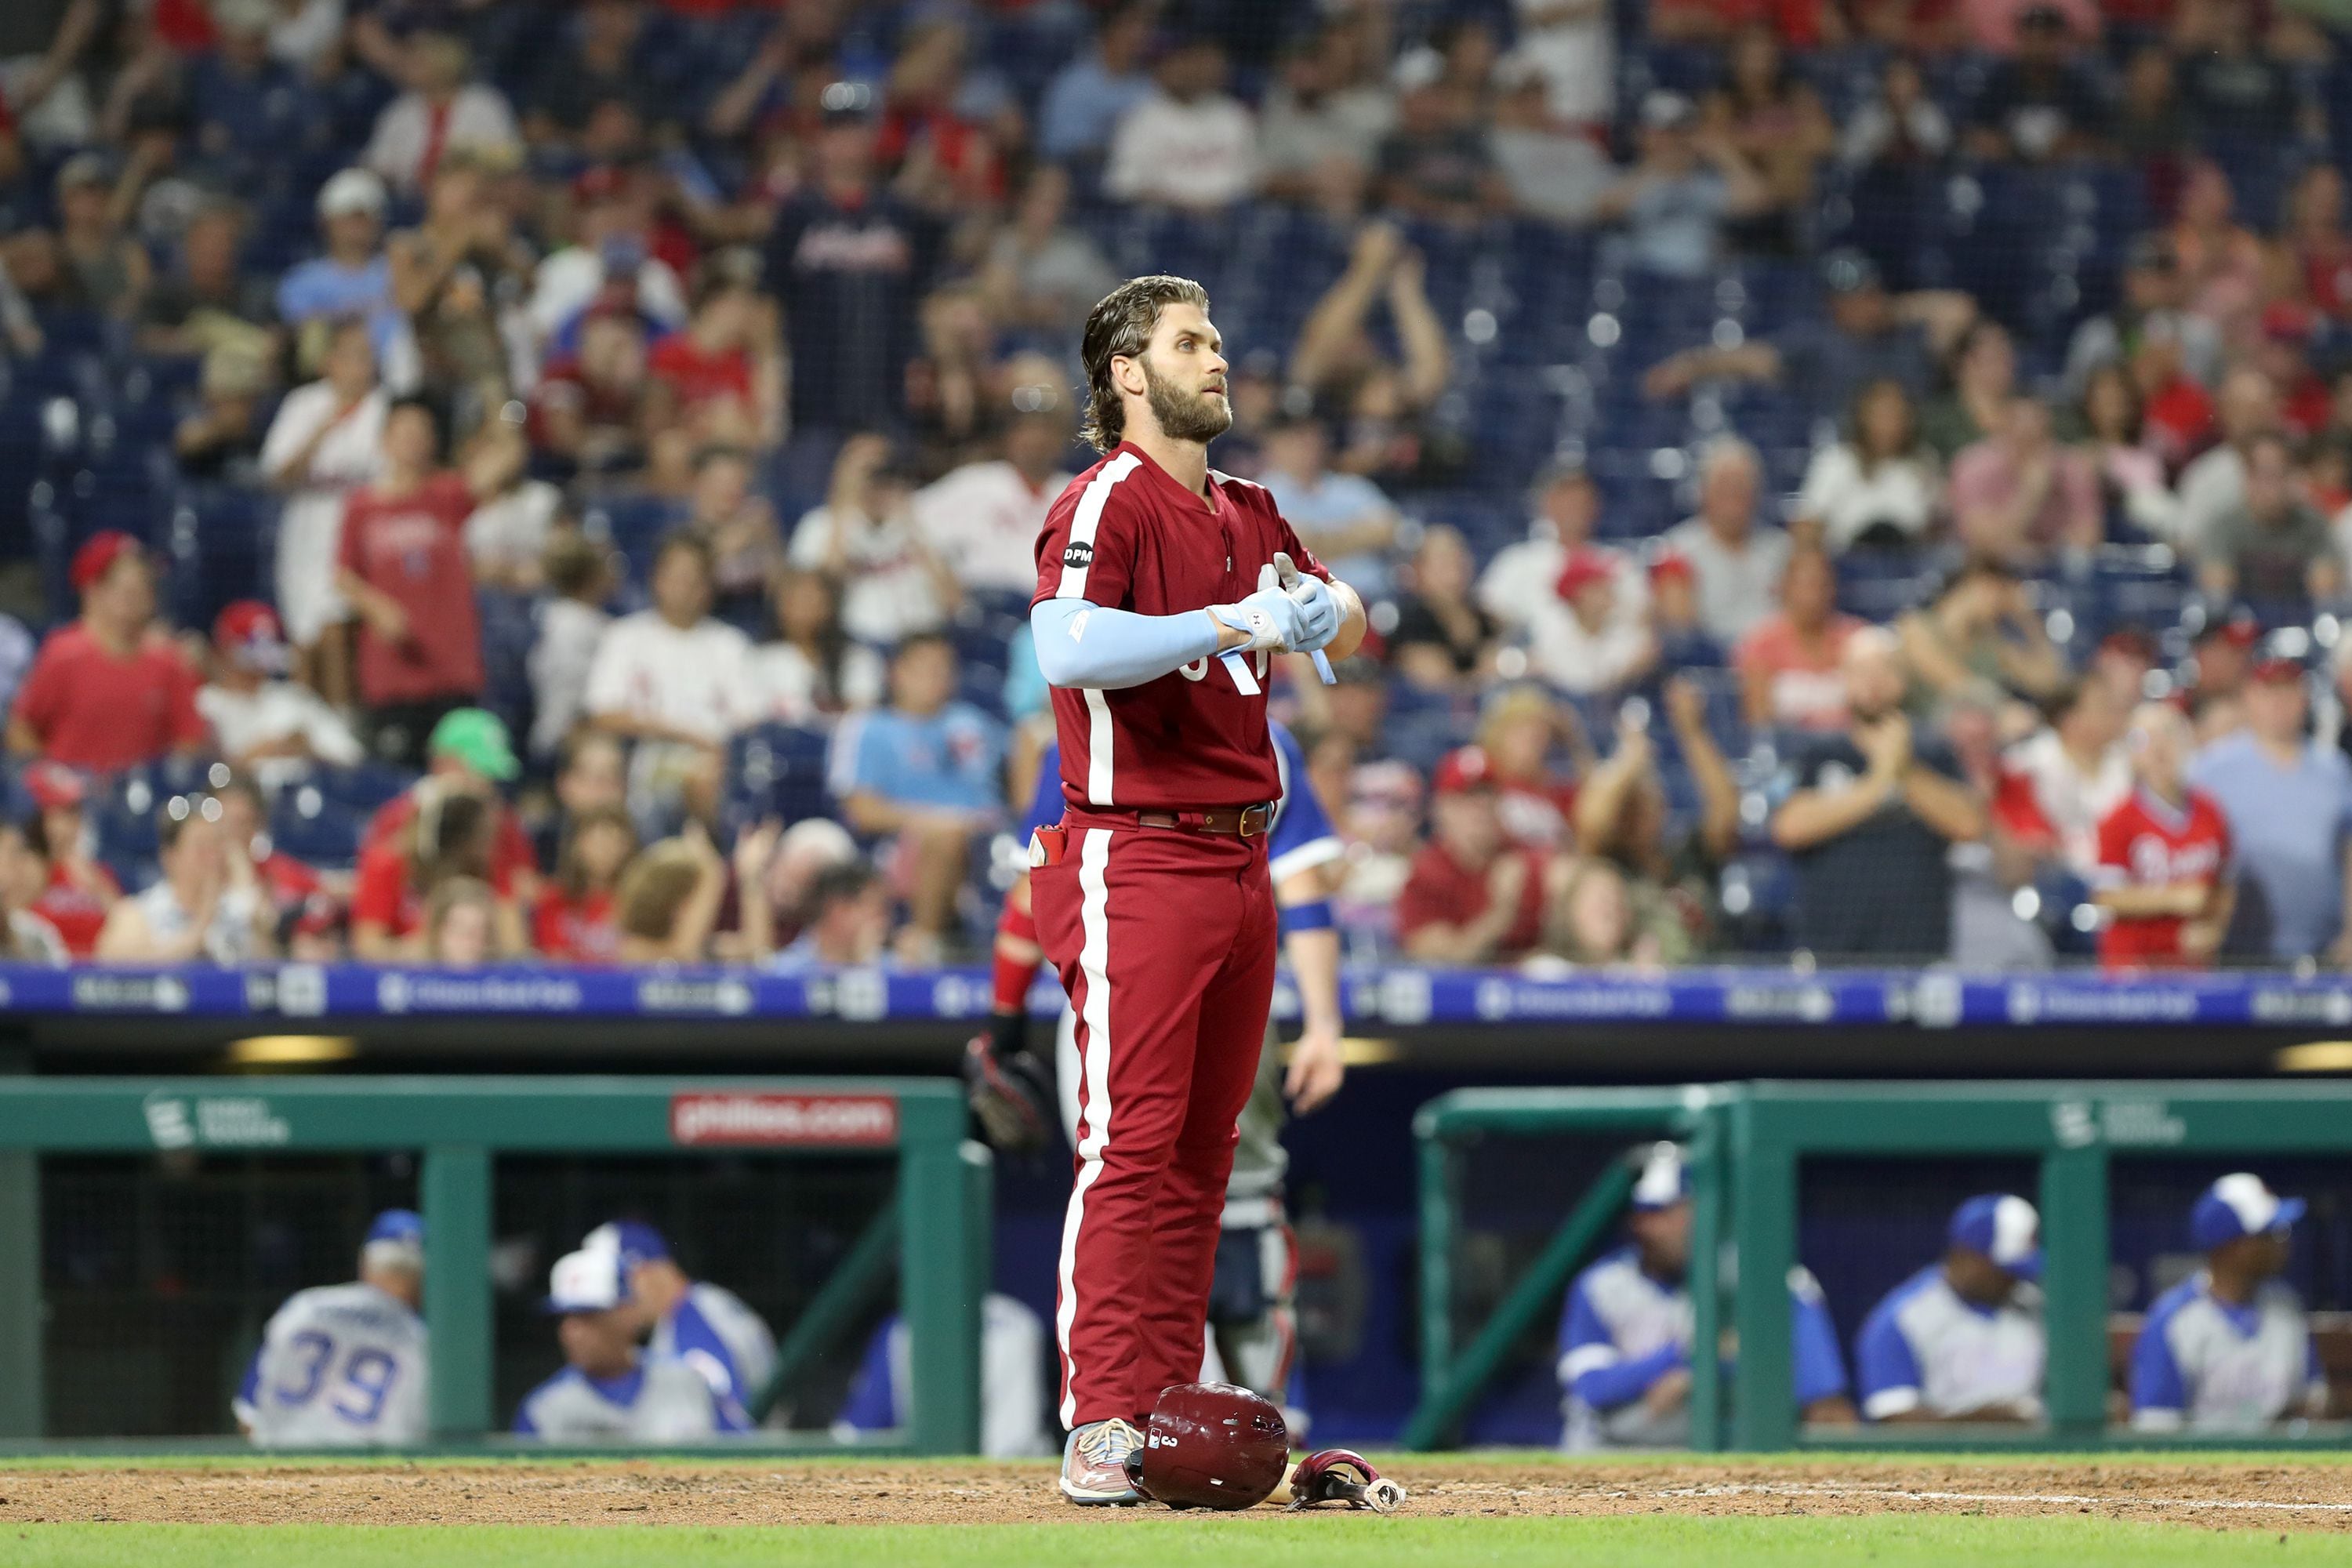 Phillies Infamous All-Burgundy Uniforms Return Today